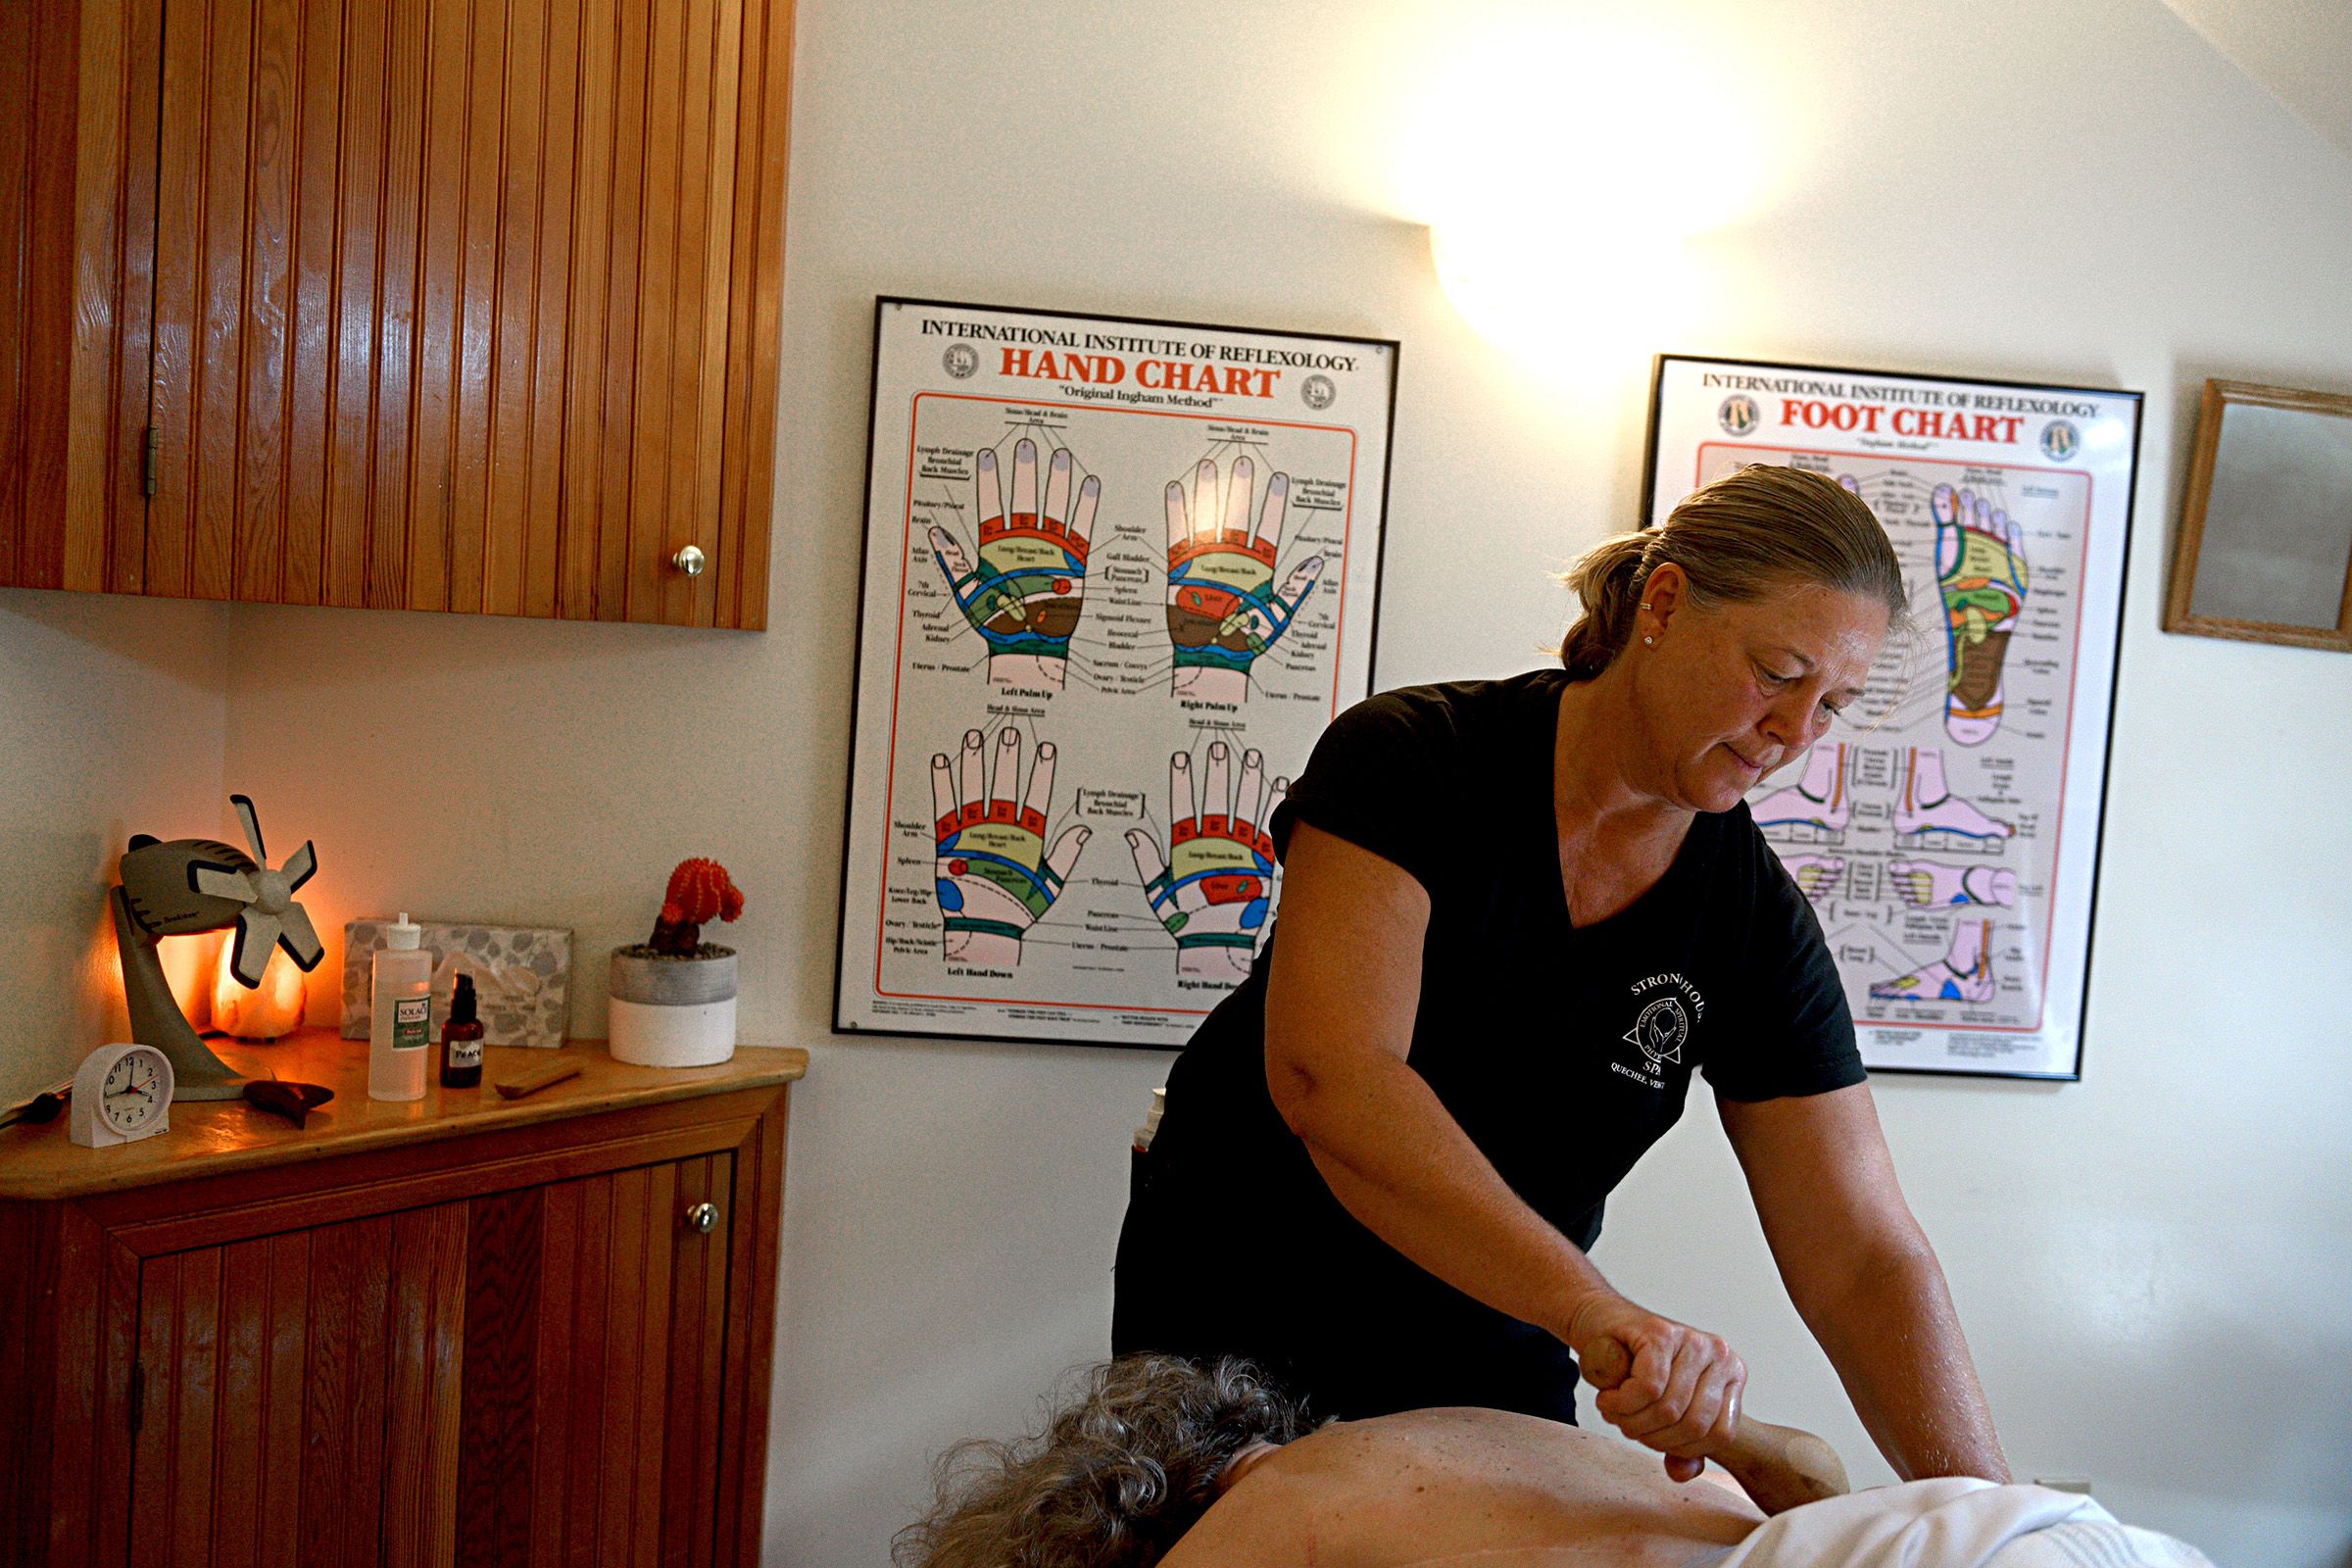 Shelly Yusko, co-owner of Strong House Spa, works on a client on Aug. 24, 2017, in Quechee, Vt.  (Valley News - Jennifer Hauck) Copyright Valley News. May not be reprinted or used online without permission. Send requests to permission@vnews.com.